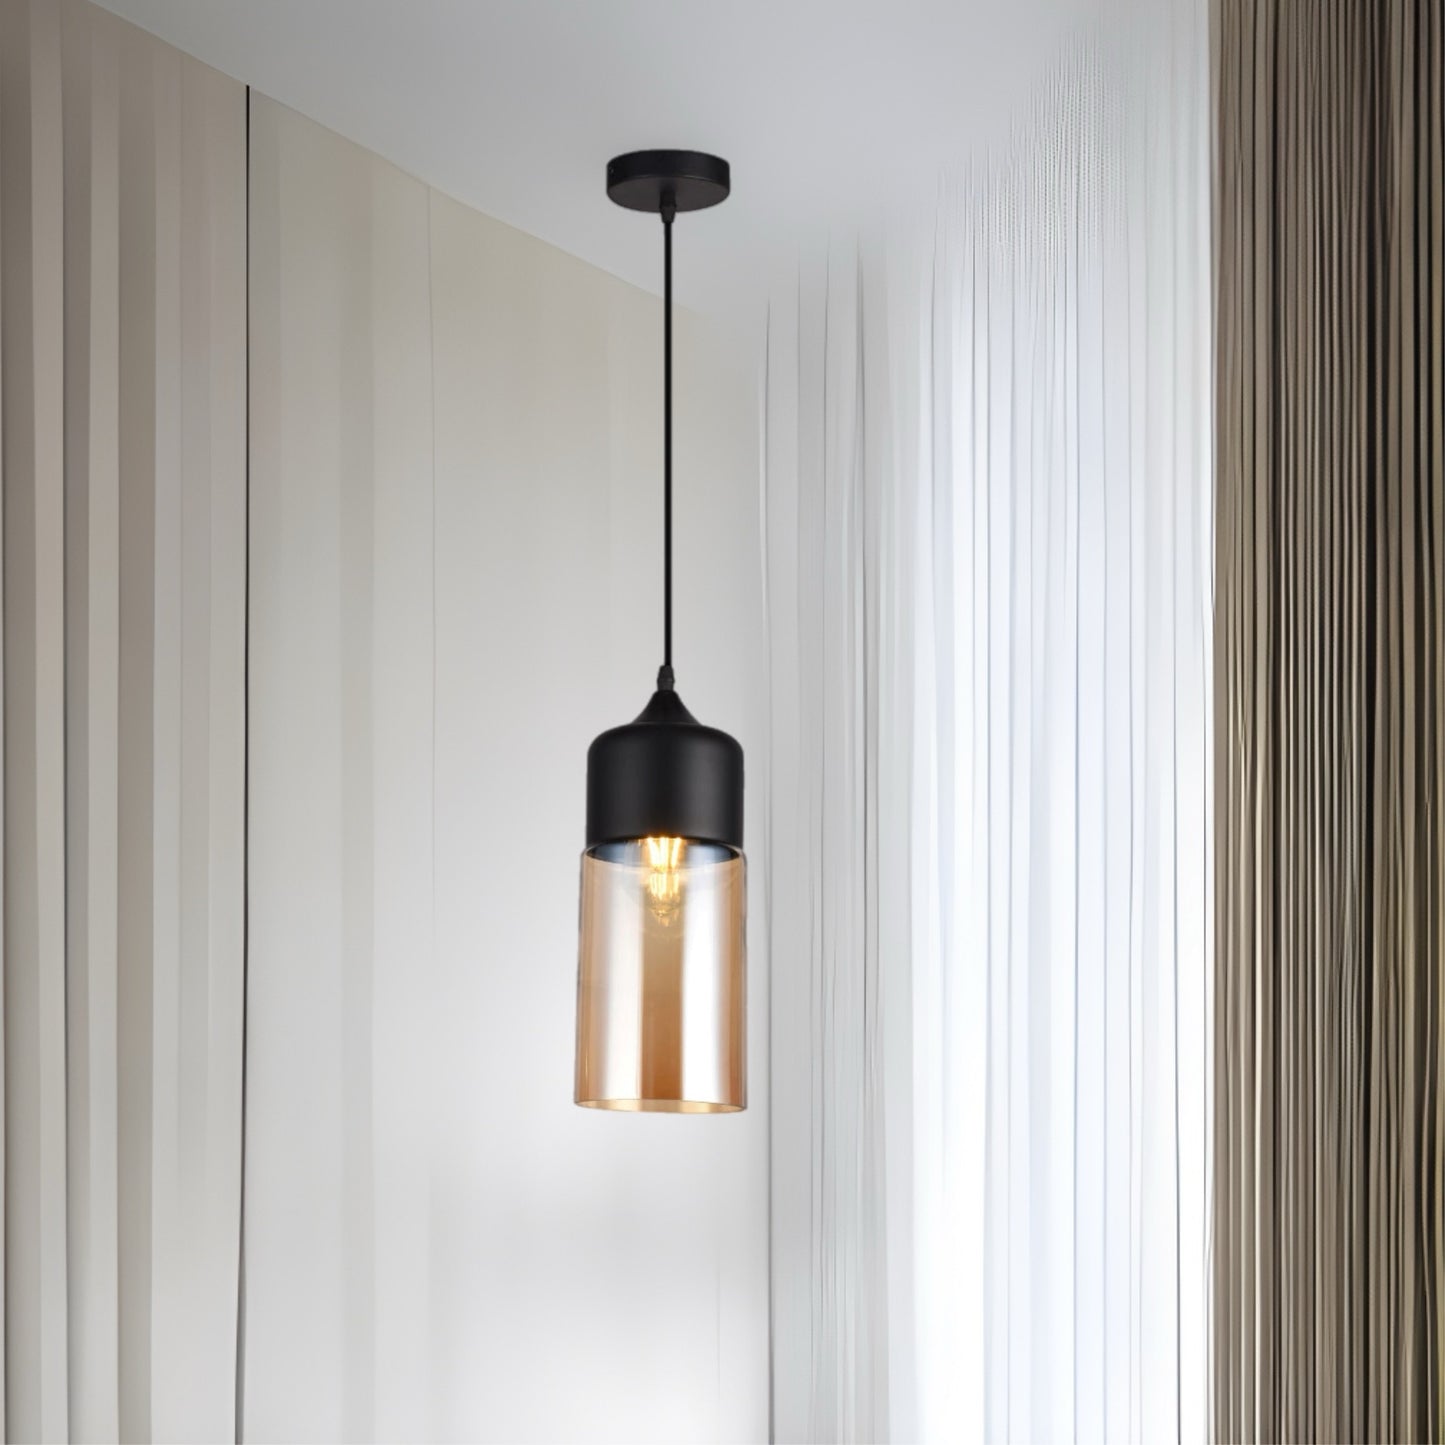 Our Lender pendant light is a stylish addition suitable for every room, its contrasting black and gold smoked glass cylinder body with matching black ceiling rose and cable creates an amazing feature on any ceiling. The lamp looks great with a filament light bulb, especially in industrial and modern interiors.